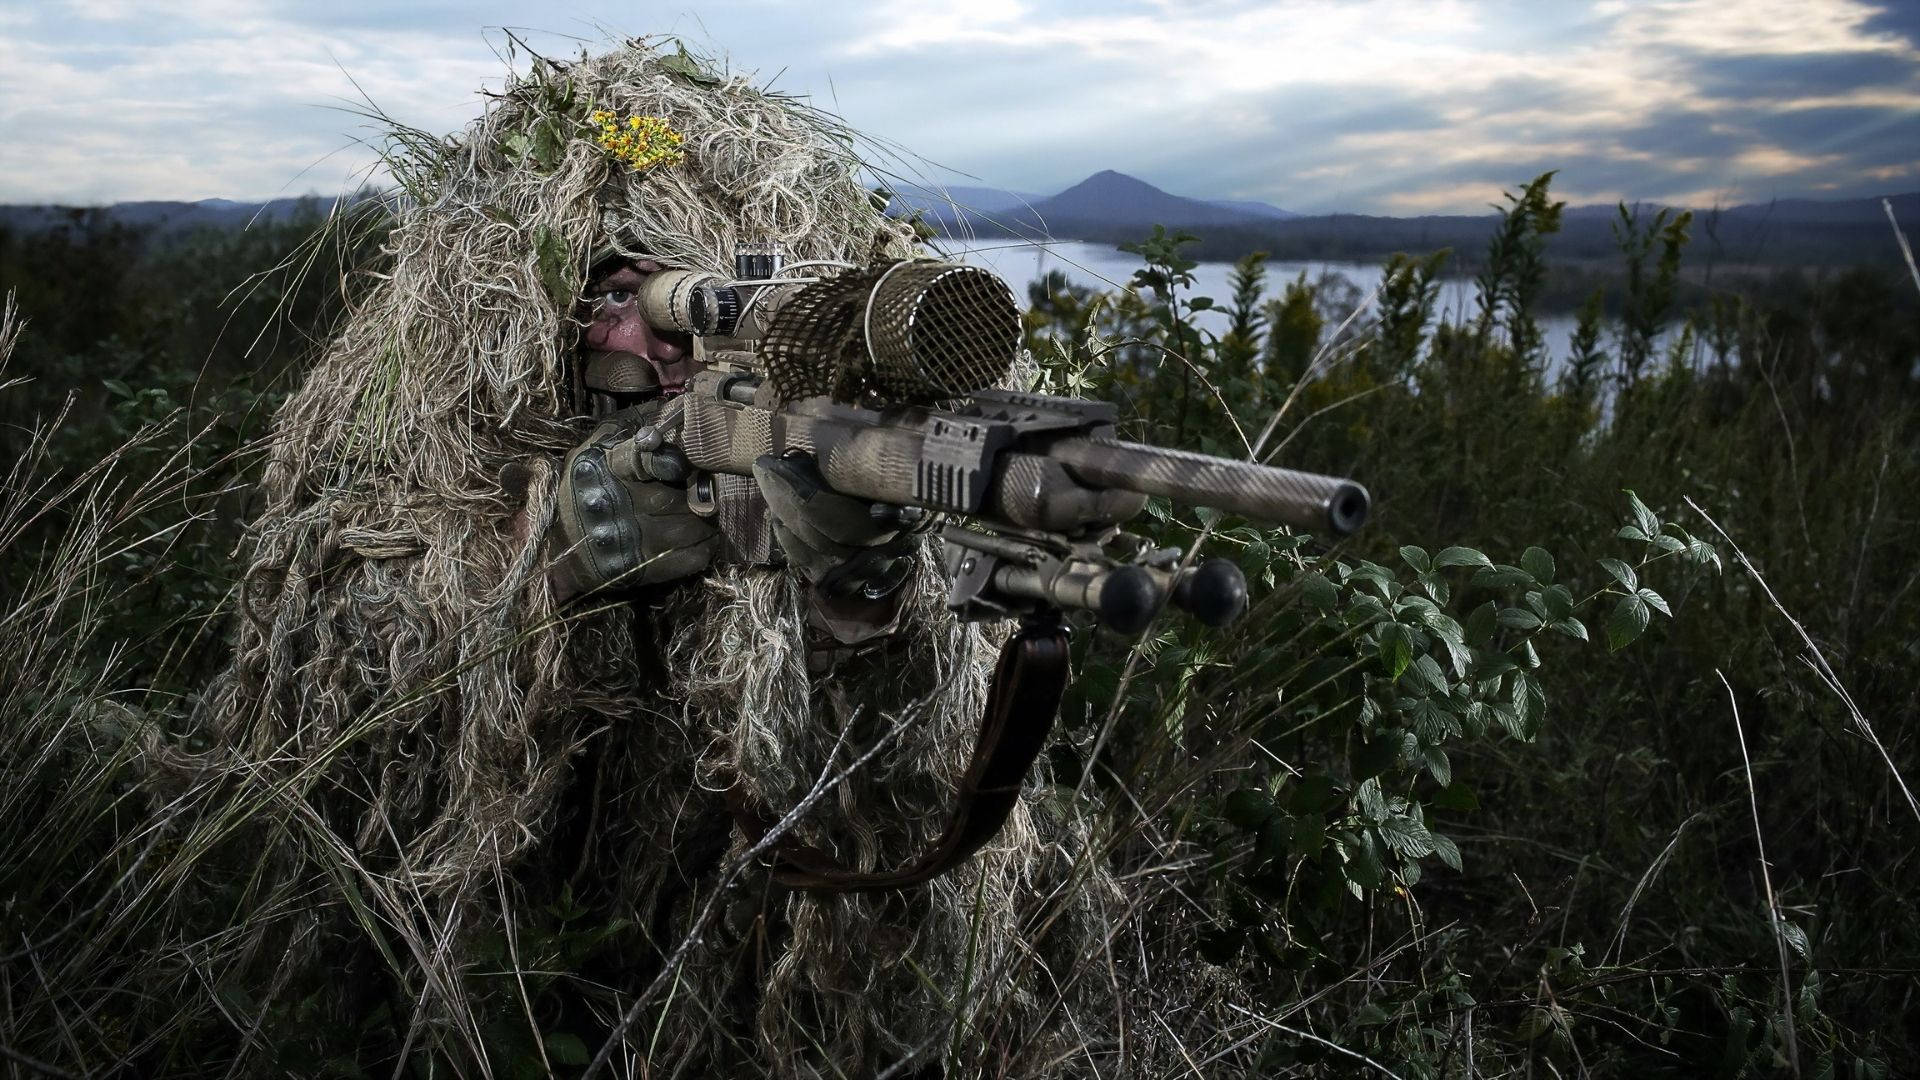 Full Camo Soldier Holding A Sniper Background